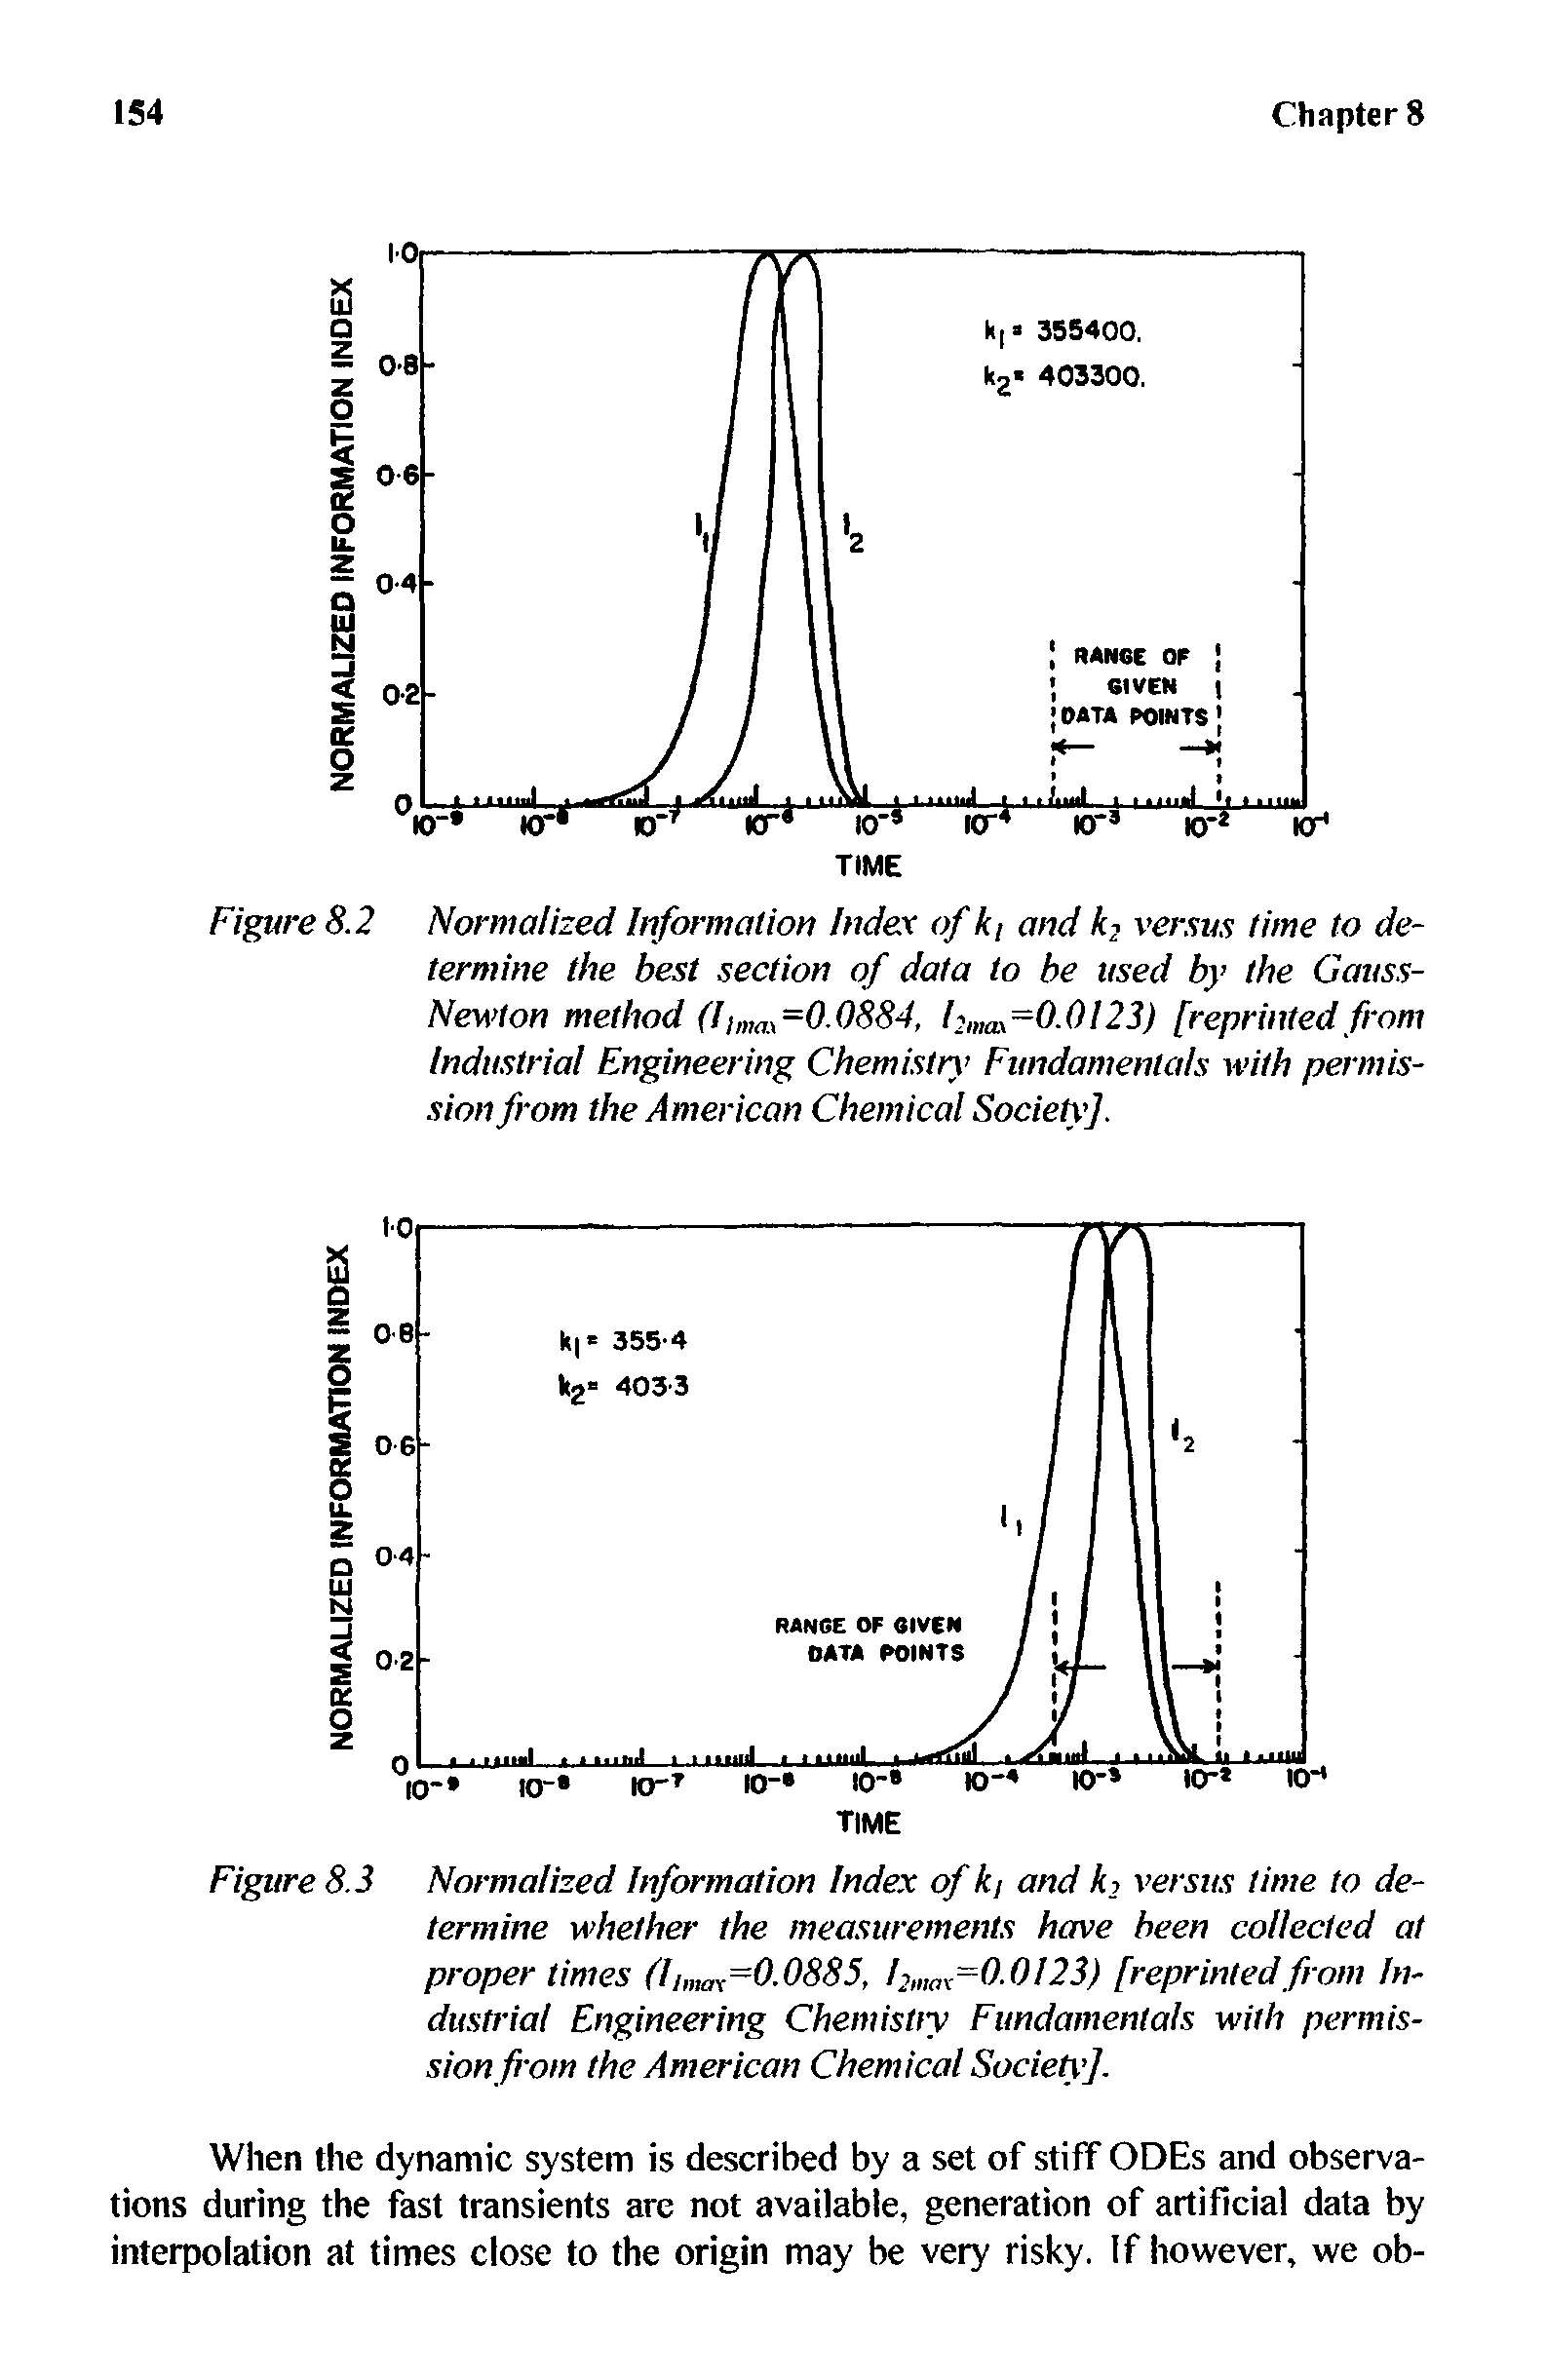 Figure 8.2 Normalized Information Index of kt and k versus time to determine the best section of data to be used by the Gauss-Newton method fl tmax=0.0884, Fmas=0.0l23) [reprinted from Industrial Engineering Chemistry Fundamentals with permission from the American Chemical Society],...